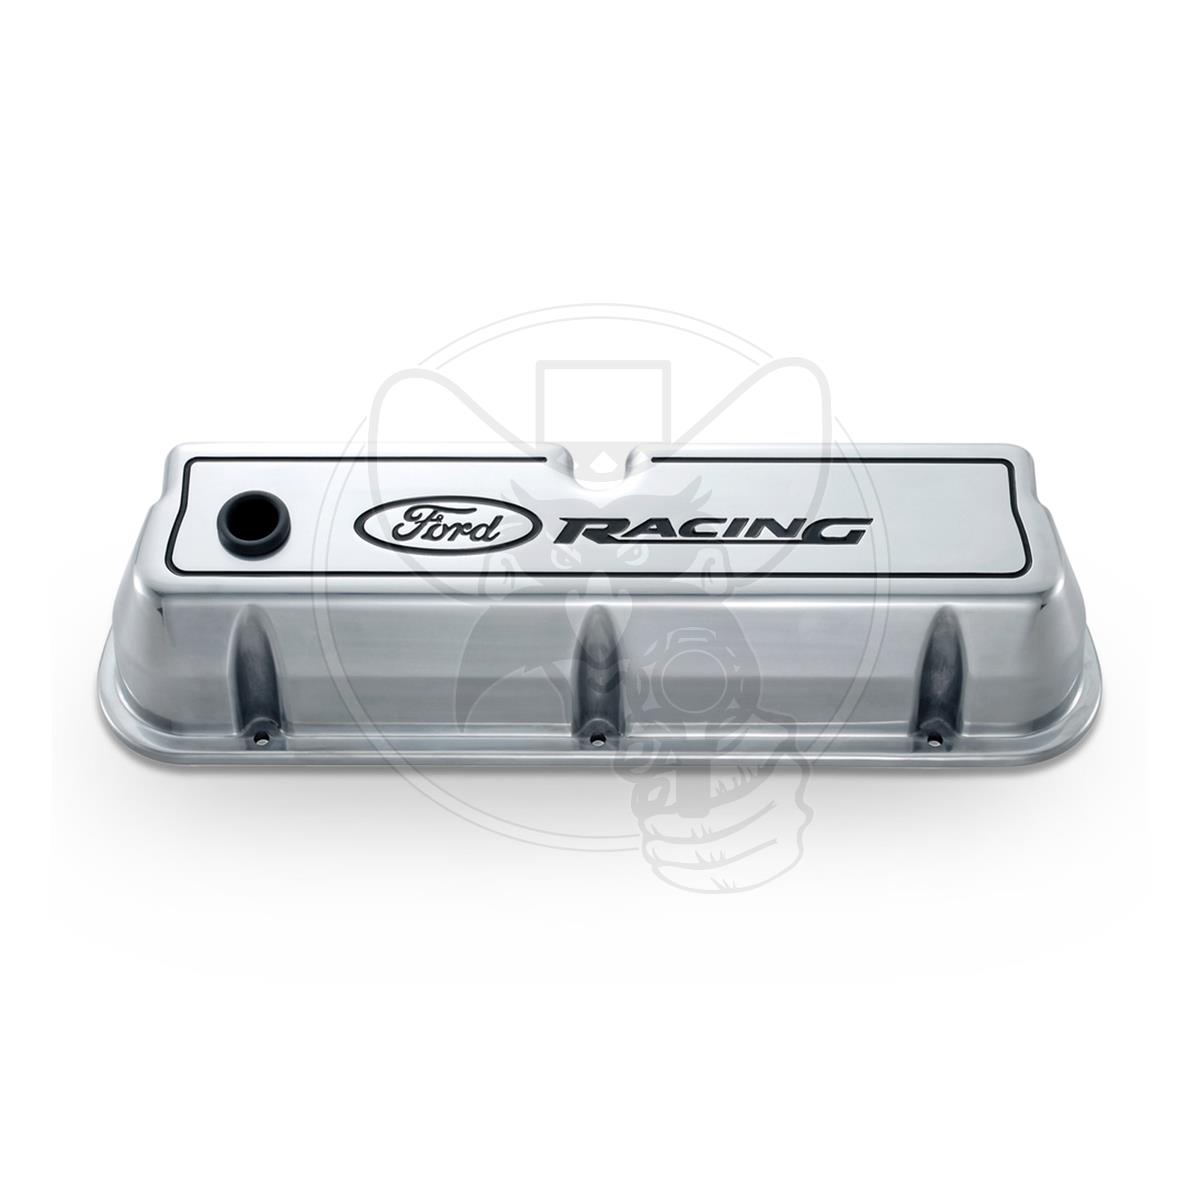 PROFORM VALVE COVERS ALLOY FITS FORD RACING WINDSOR PRE EFI POLISHED